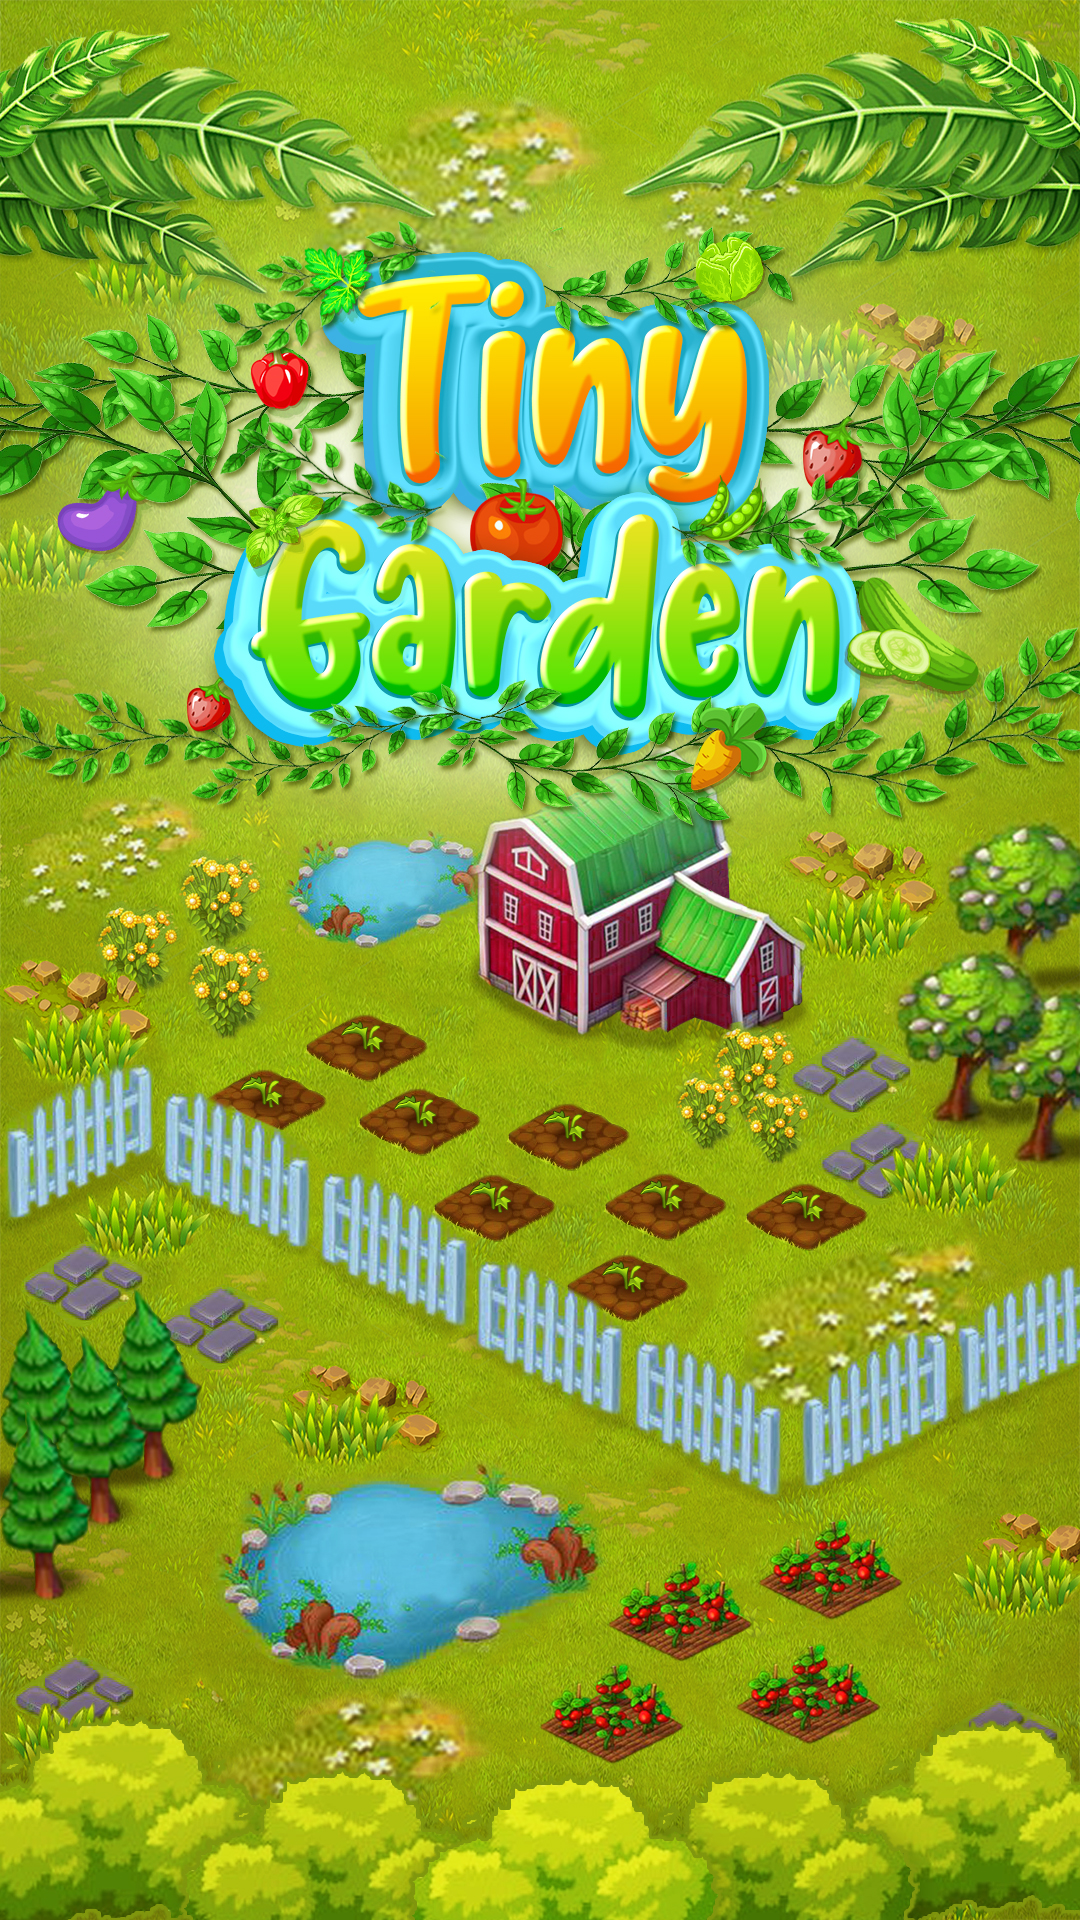 Our first game, Tiny Garden